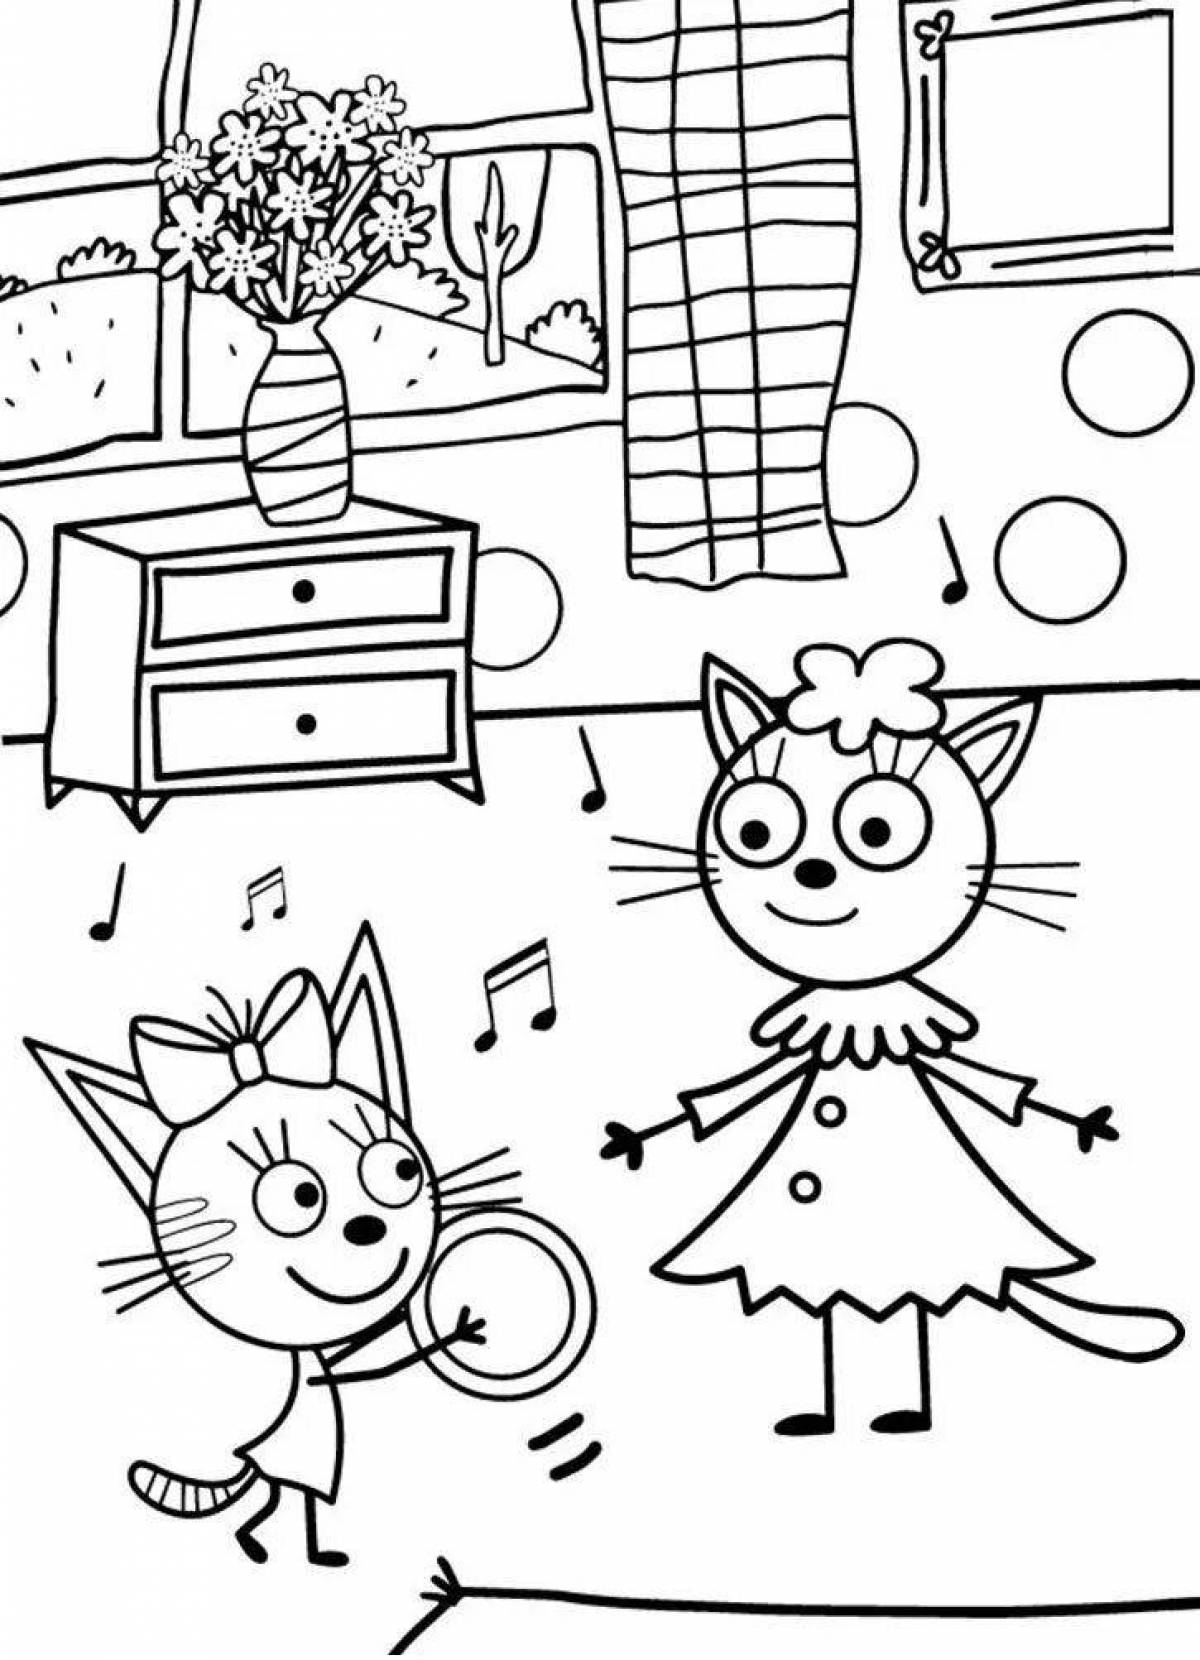 Naughty 3 cats coloring game